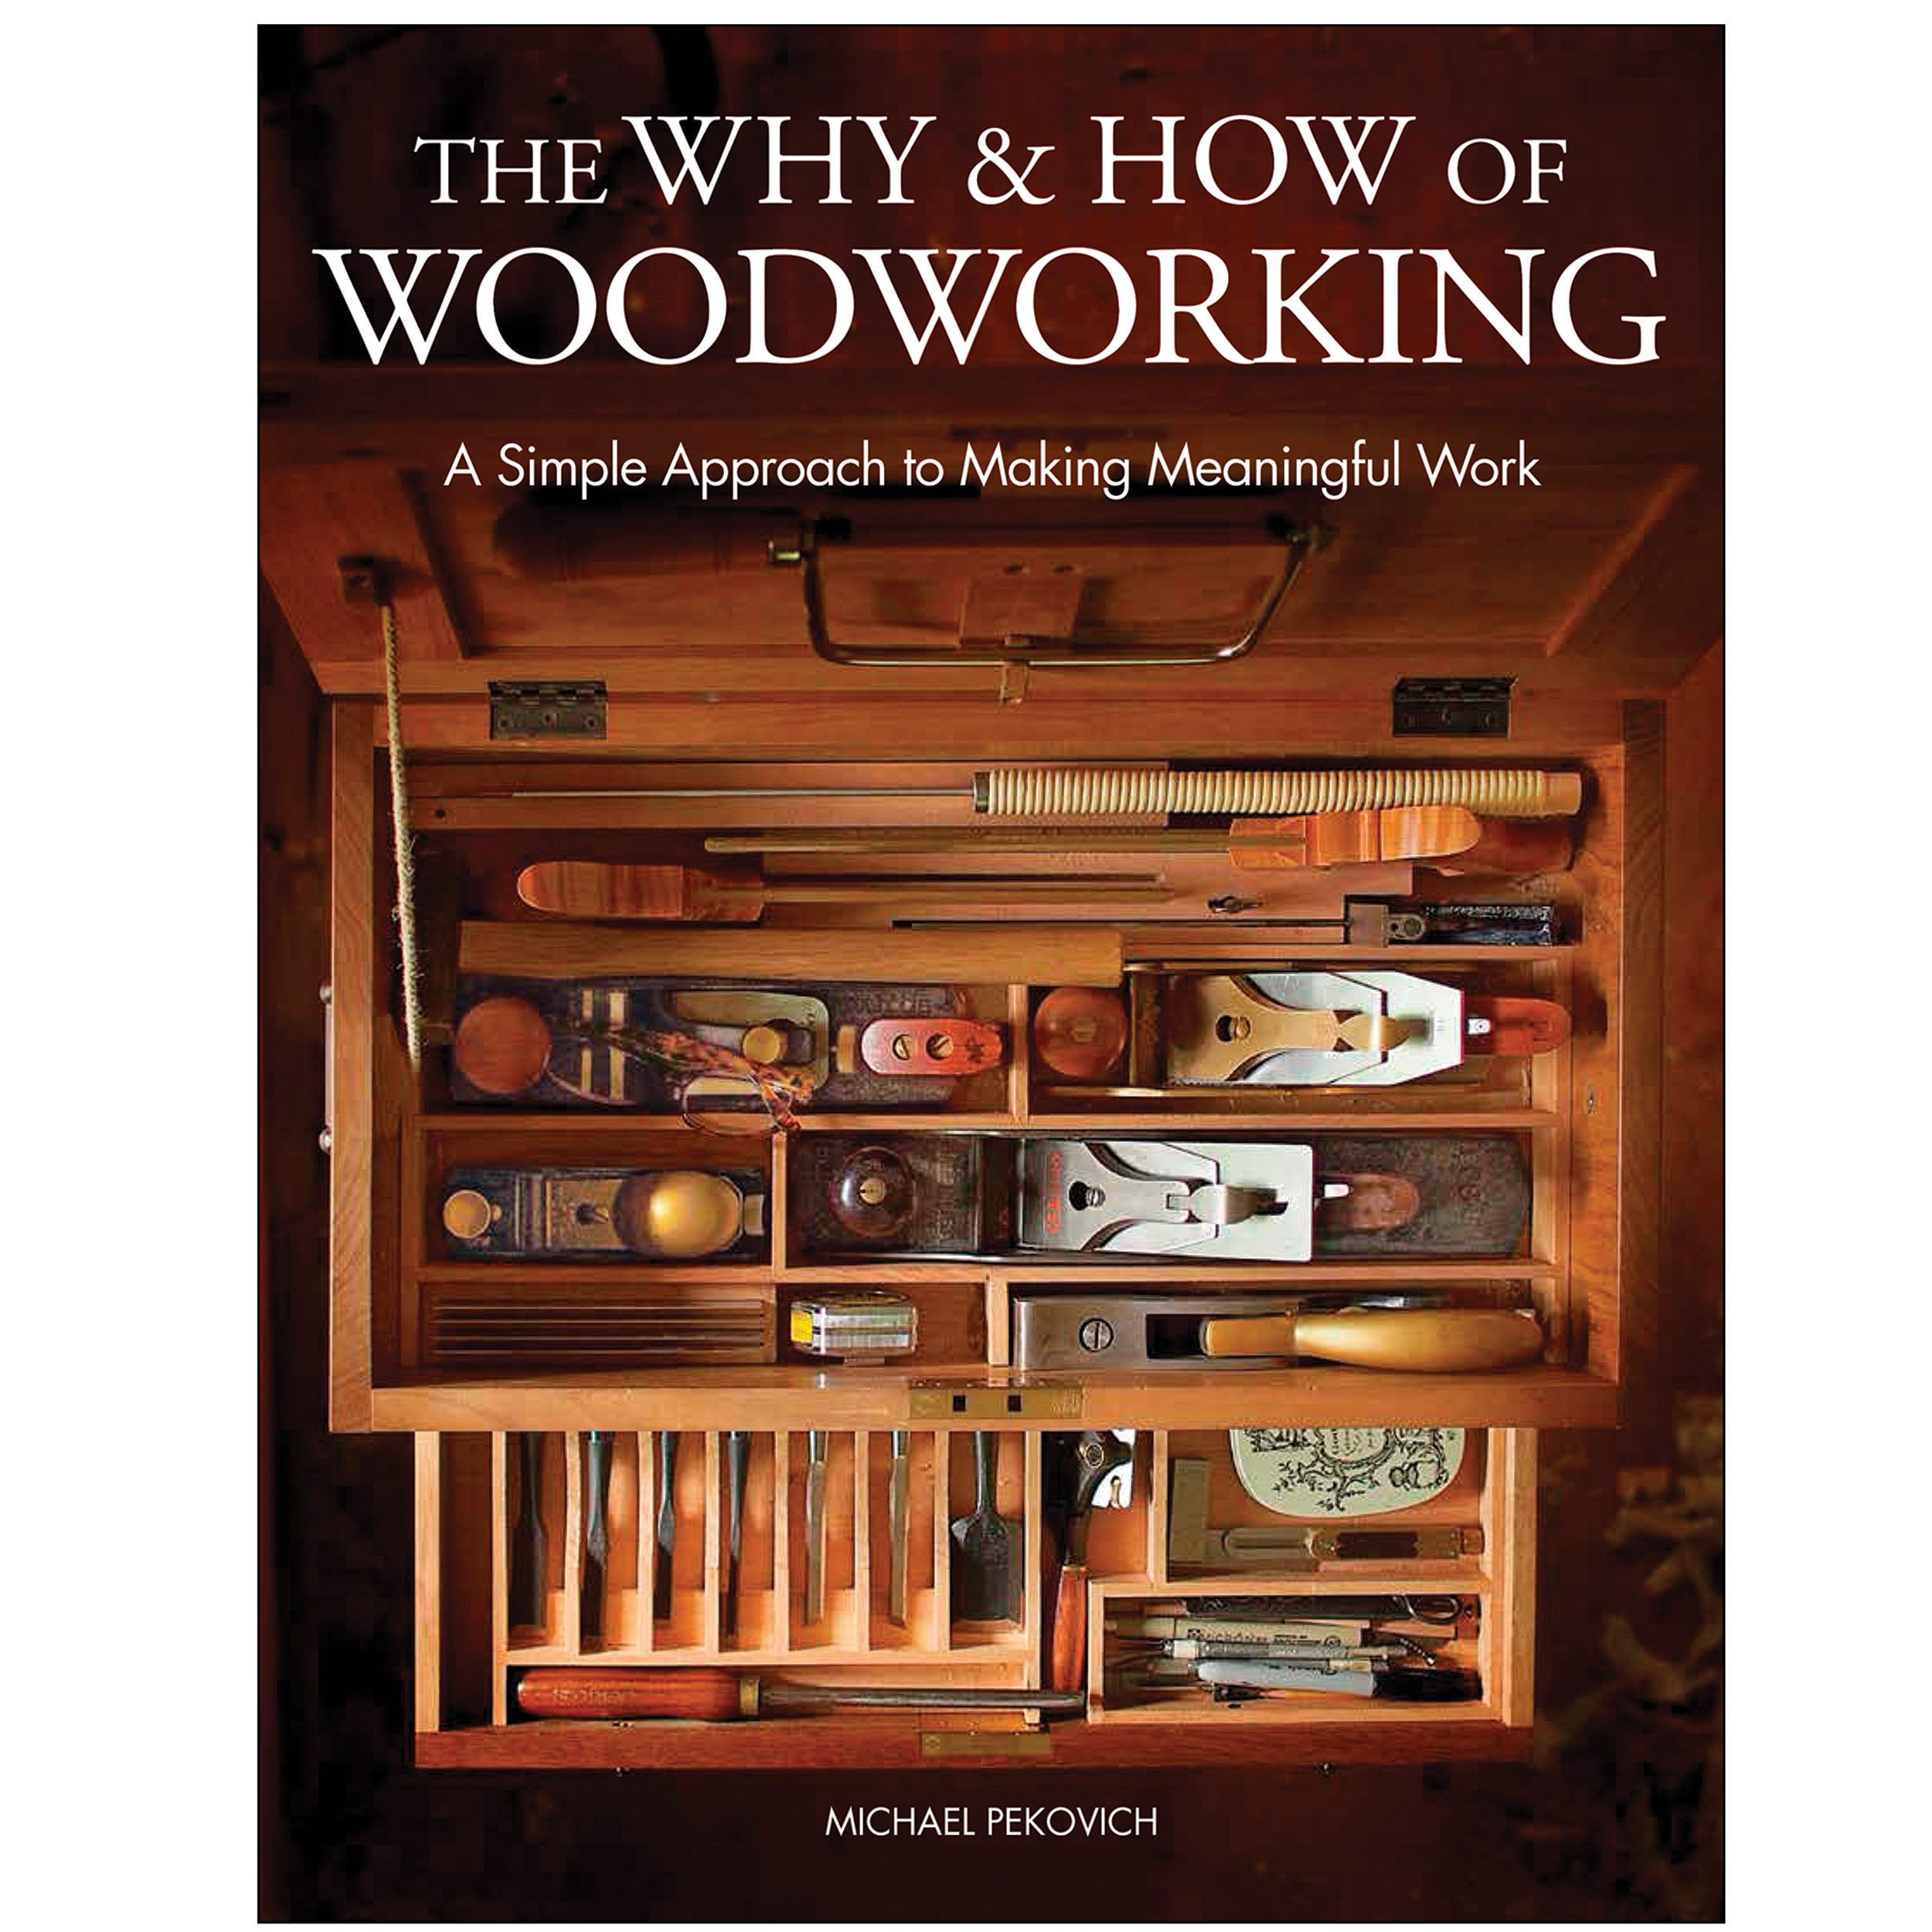 The Why & How Of Woodworking